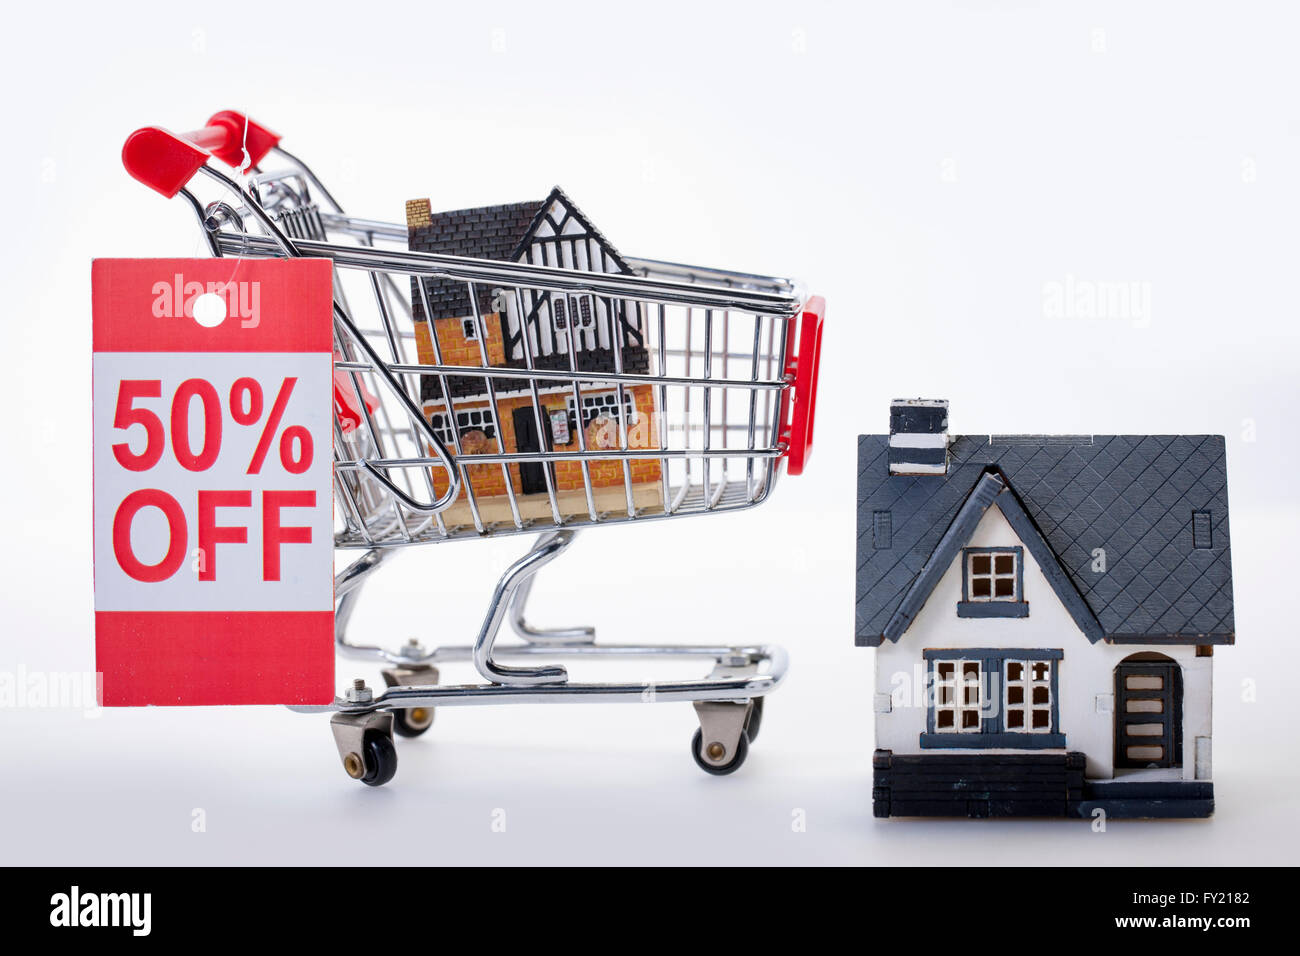 50 percent off sale sign on a cart with miniature houses Stock Photo